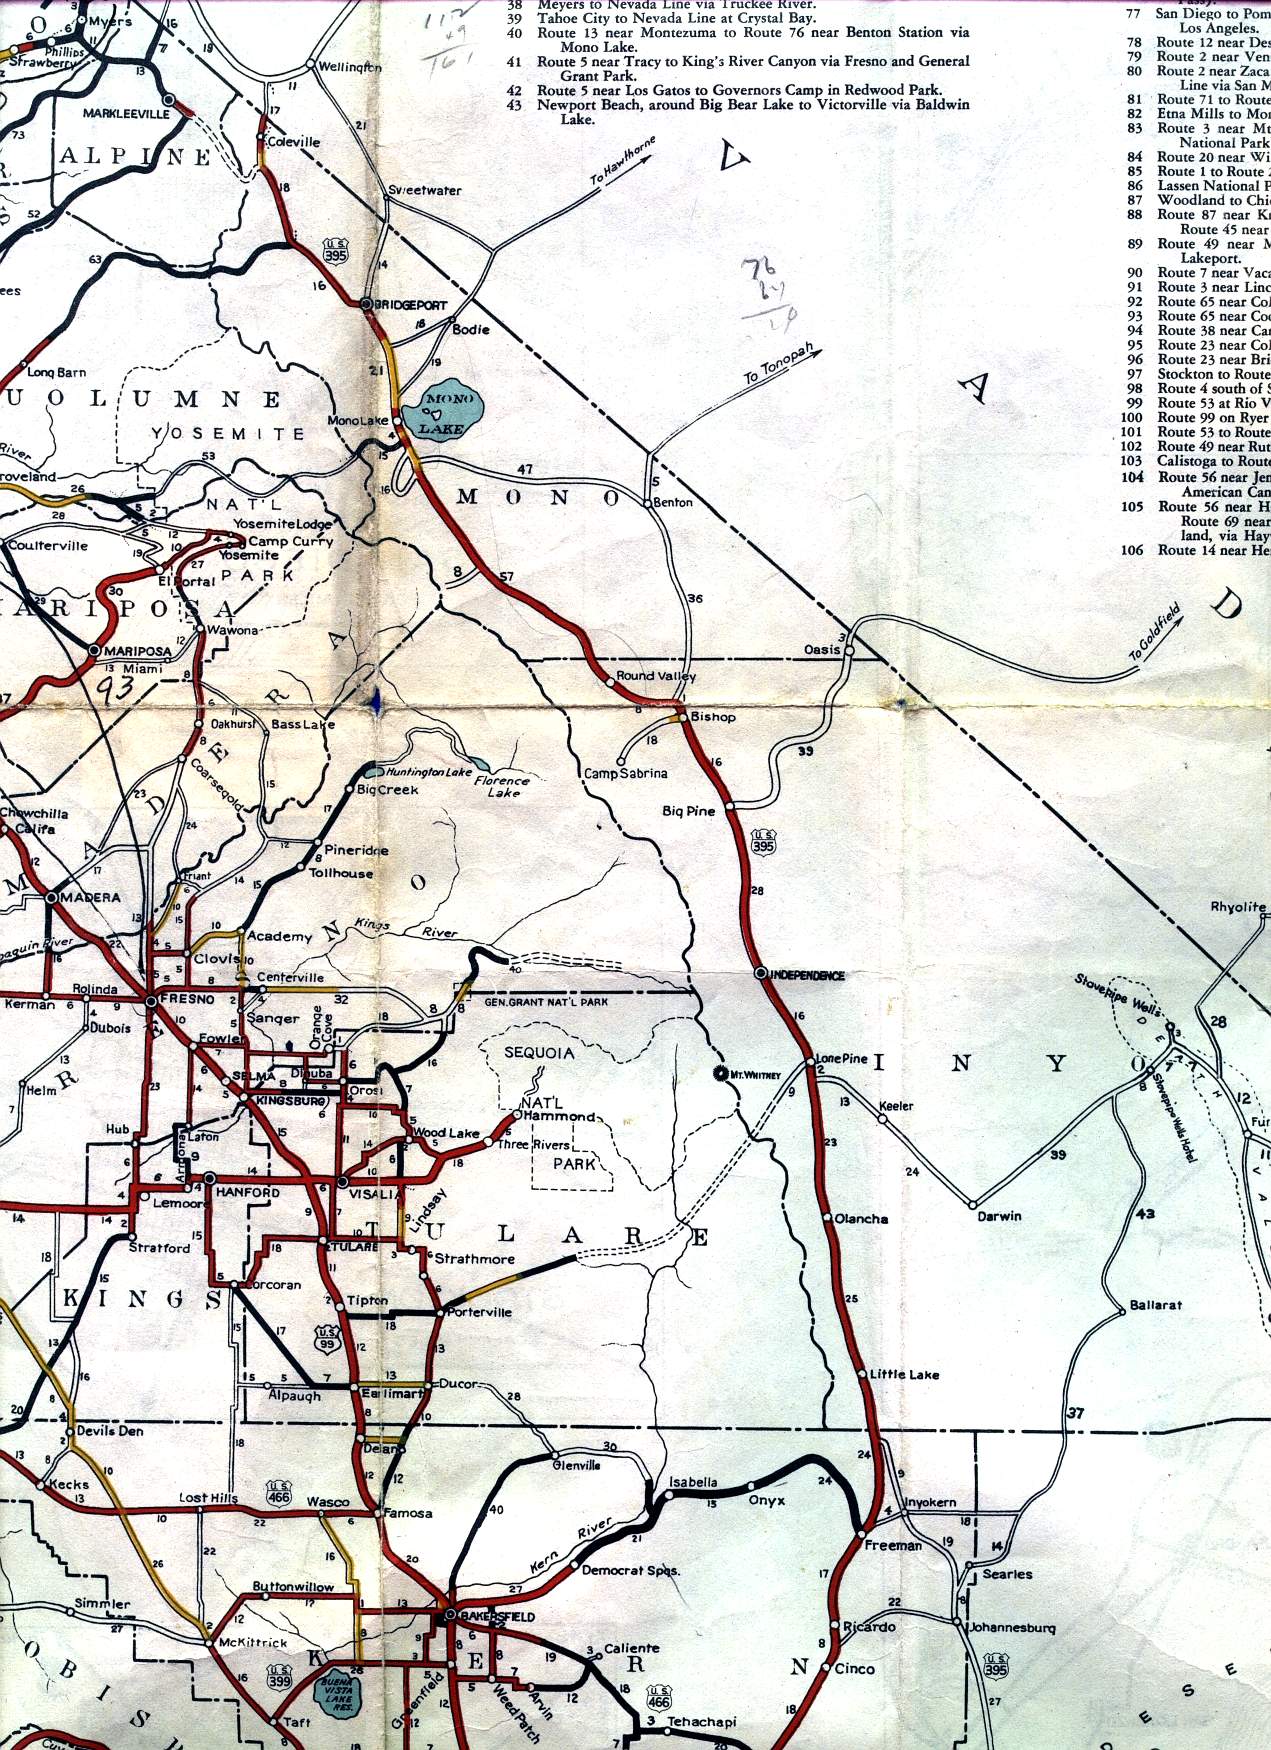 Yosemite National Park and the Eastern Sierras on the 1936 California official highway map